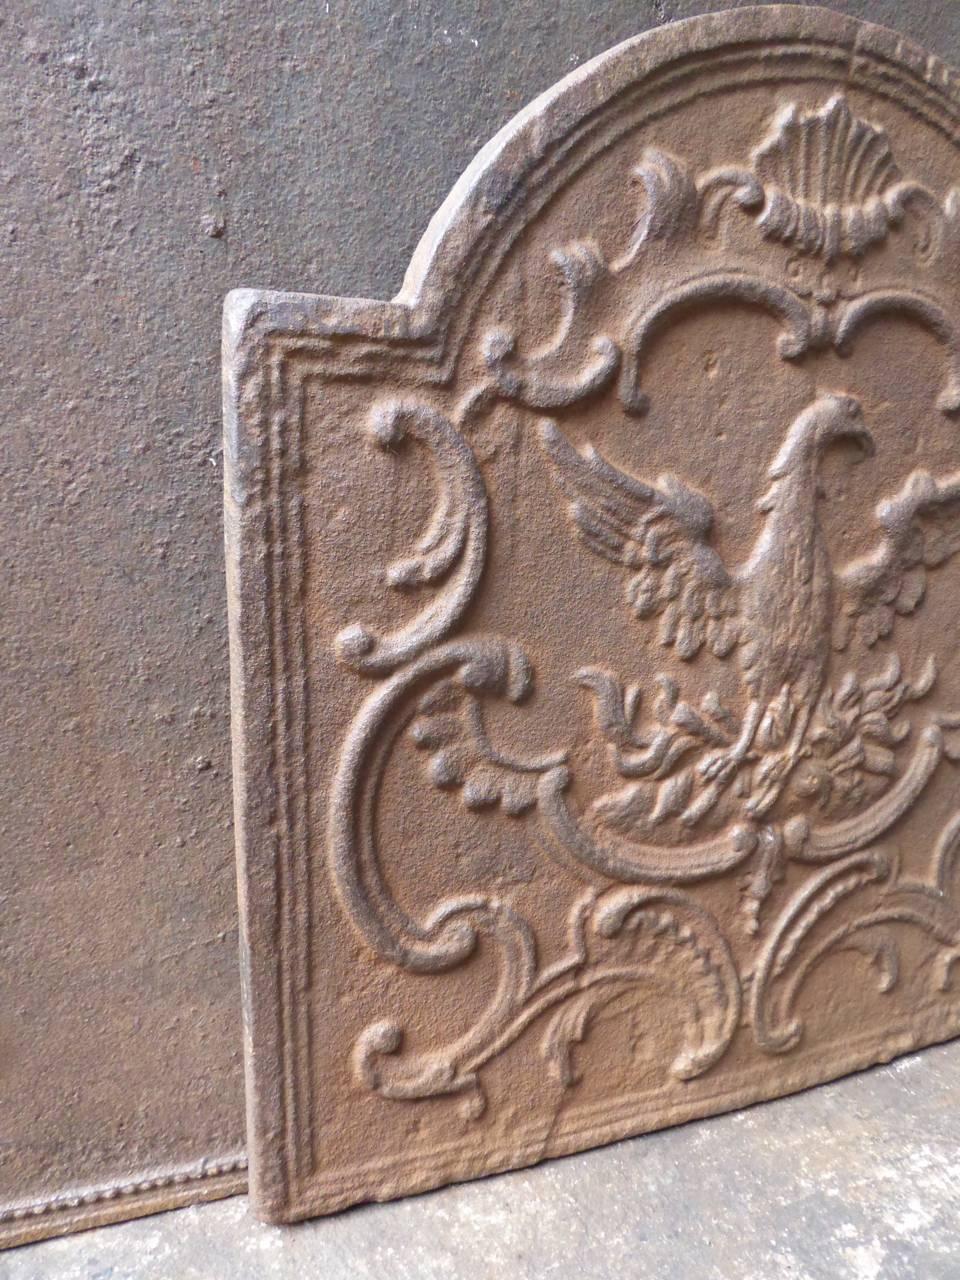 French Rococo style fireback with a Phoenix. The mythical bird who rises from its ashes.